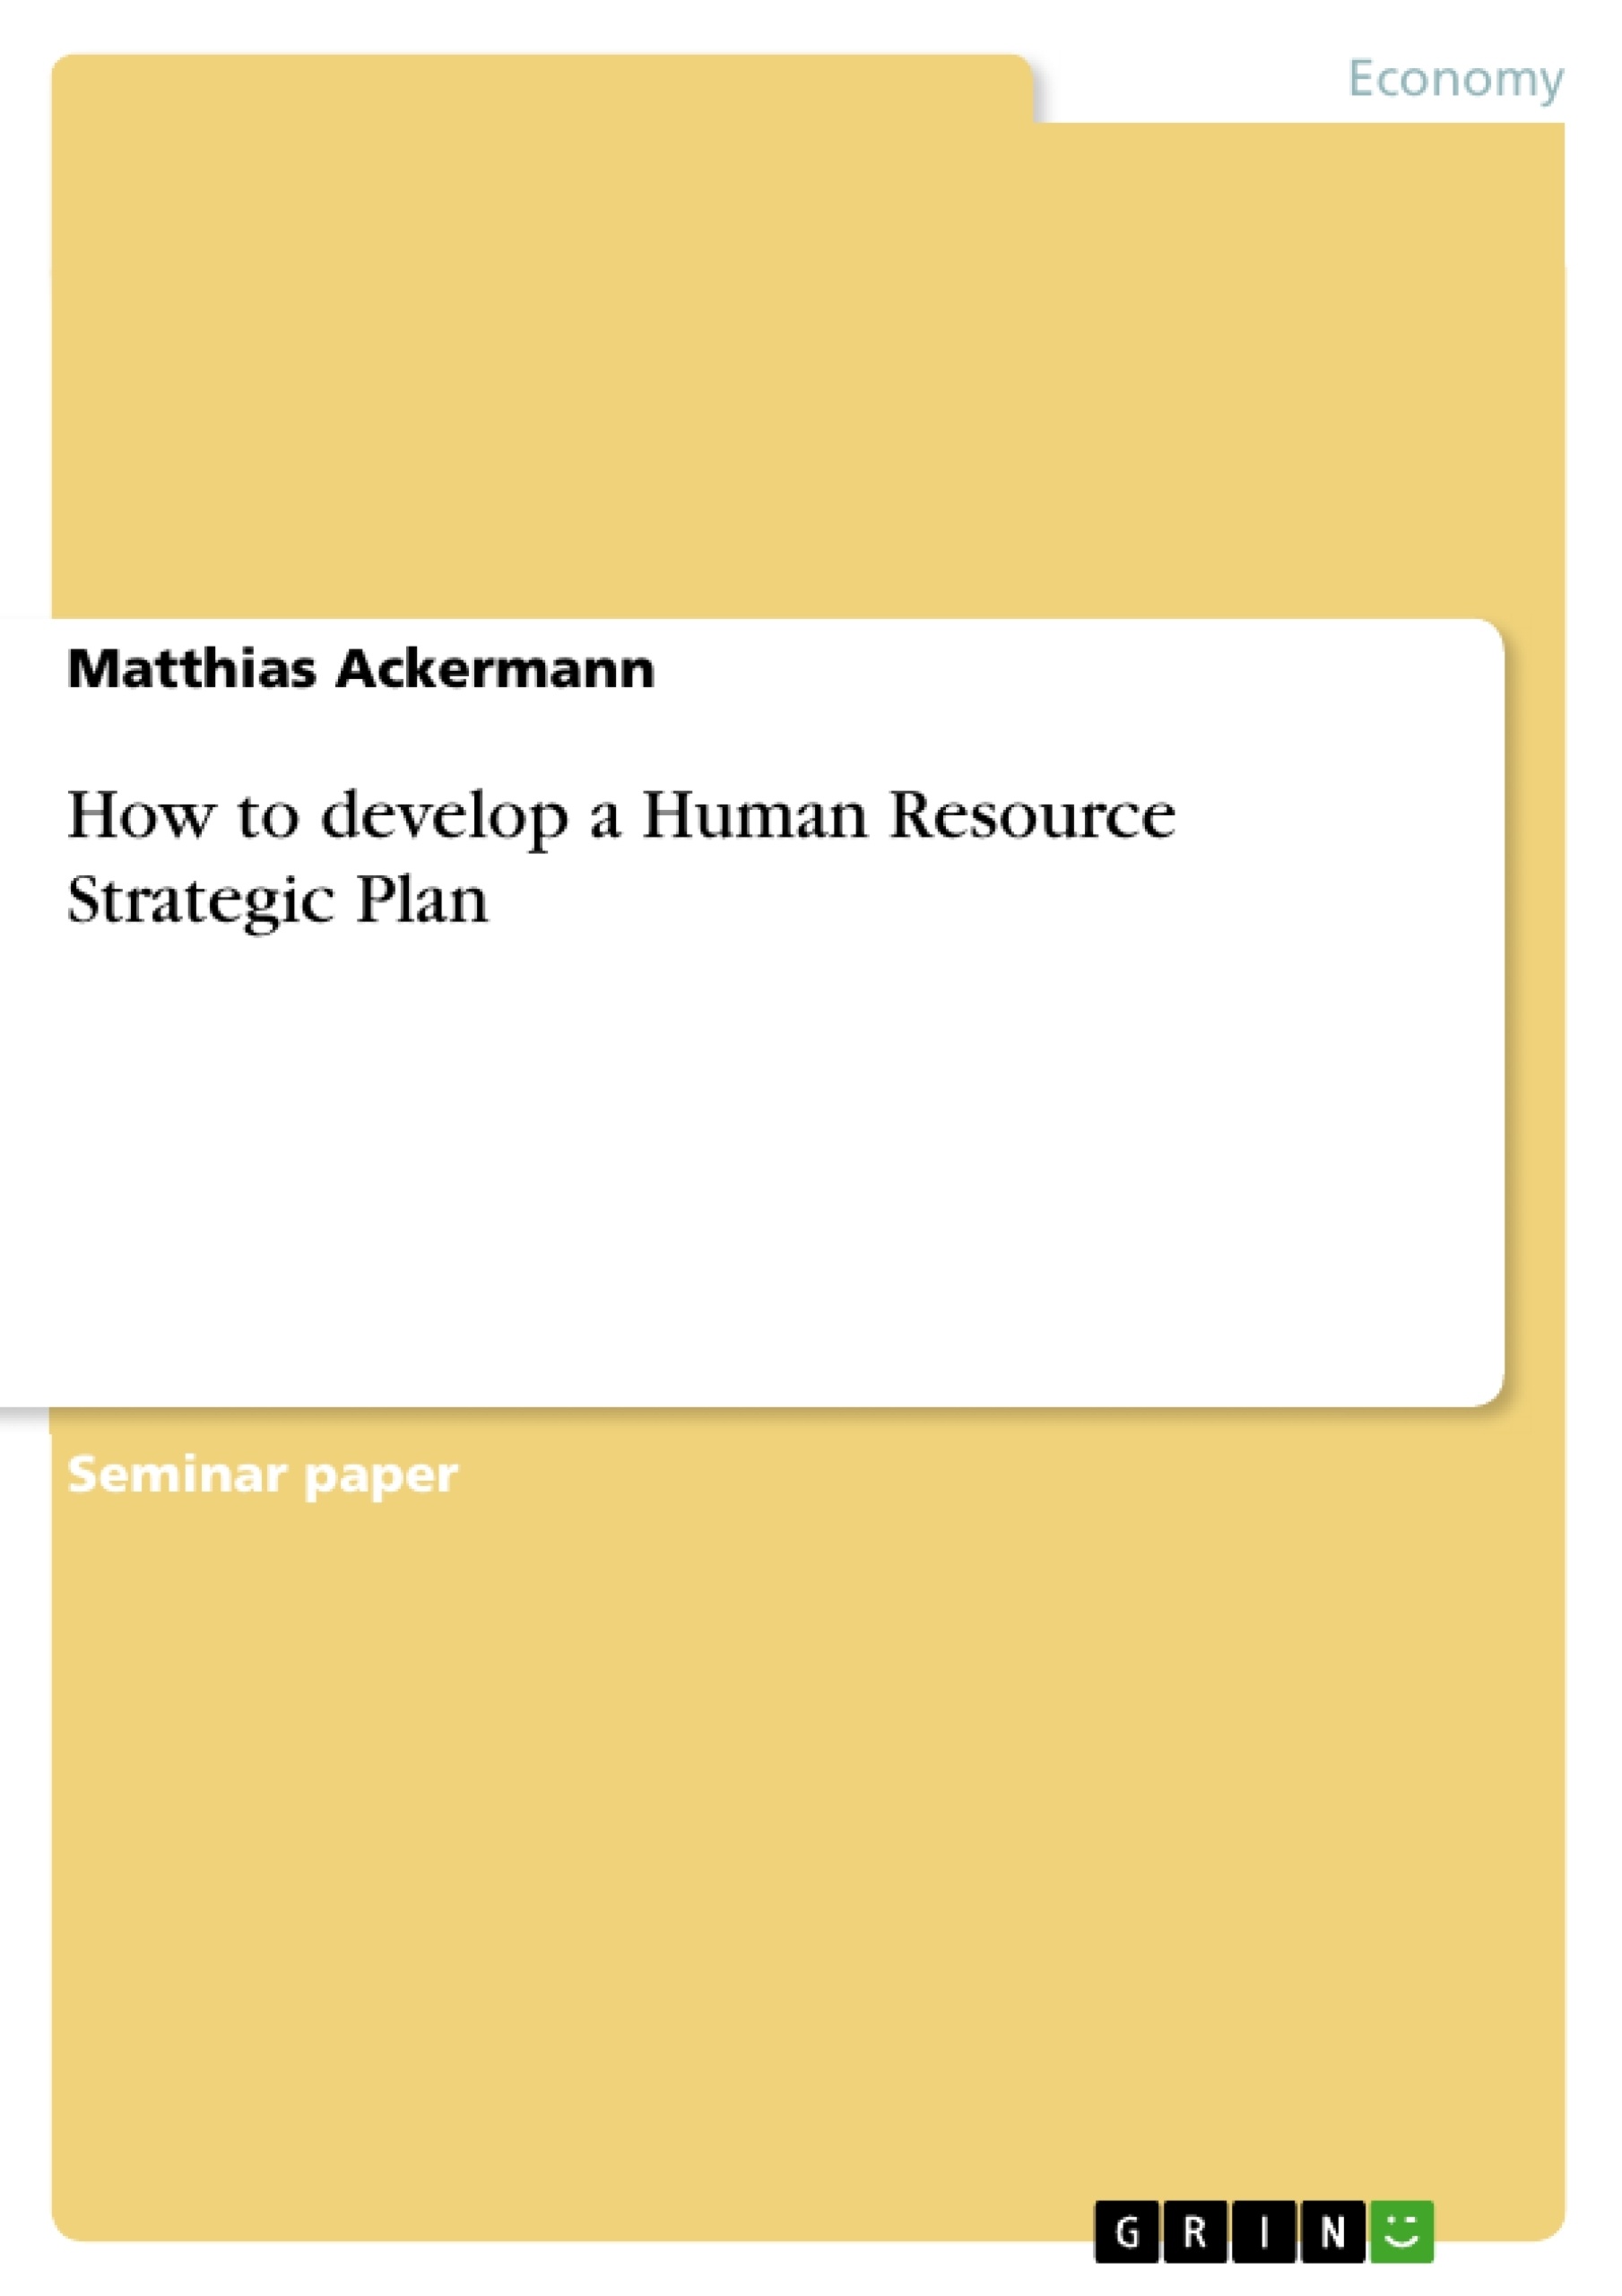 Title: How to develop a Human Resource Strategic Plan